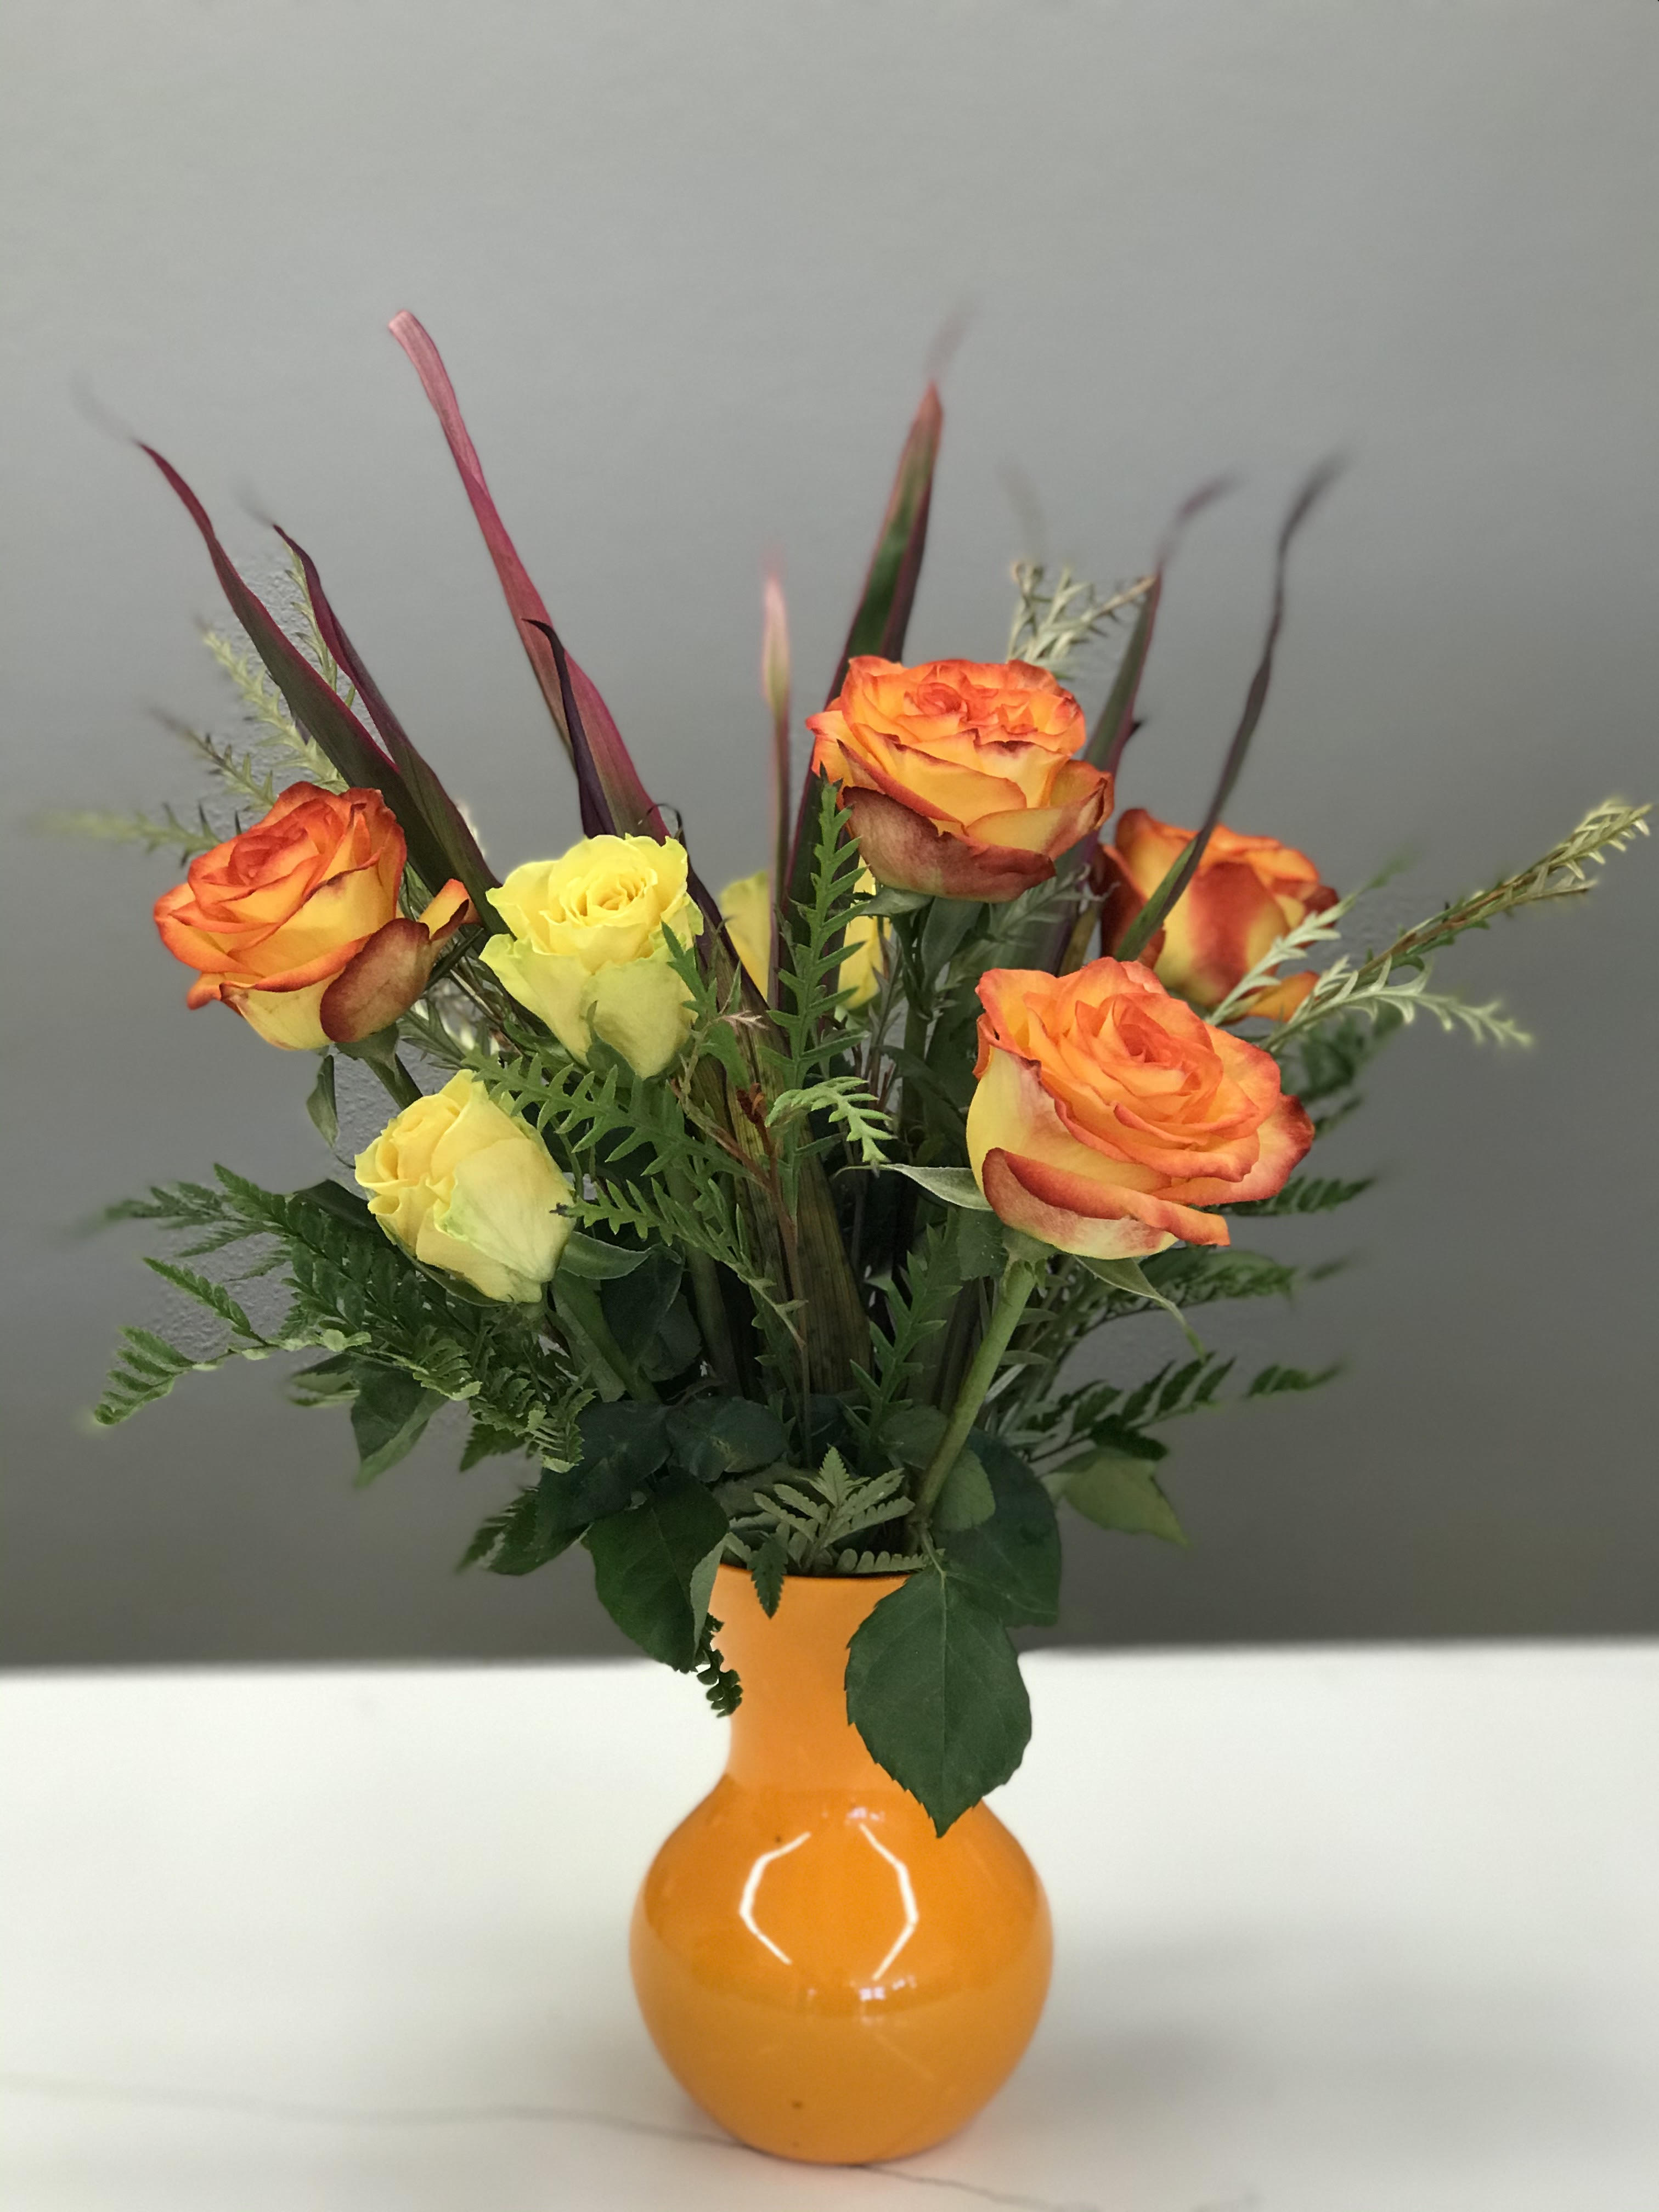 Falling in Love  - Fall colored roses and greens reminding you of the cozy romantic season ahead. 